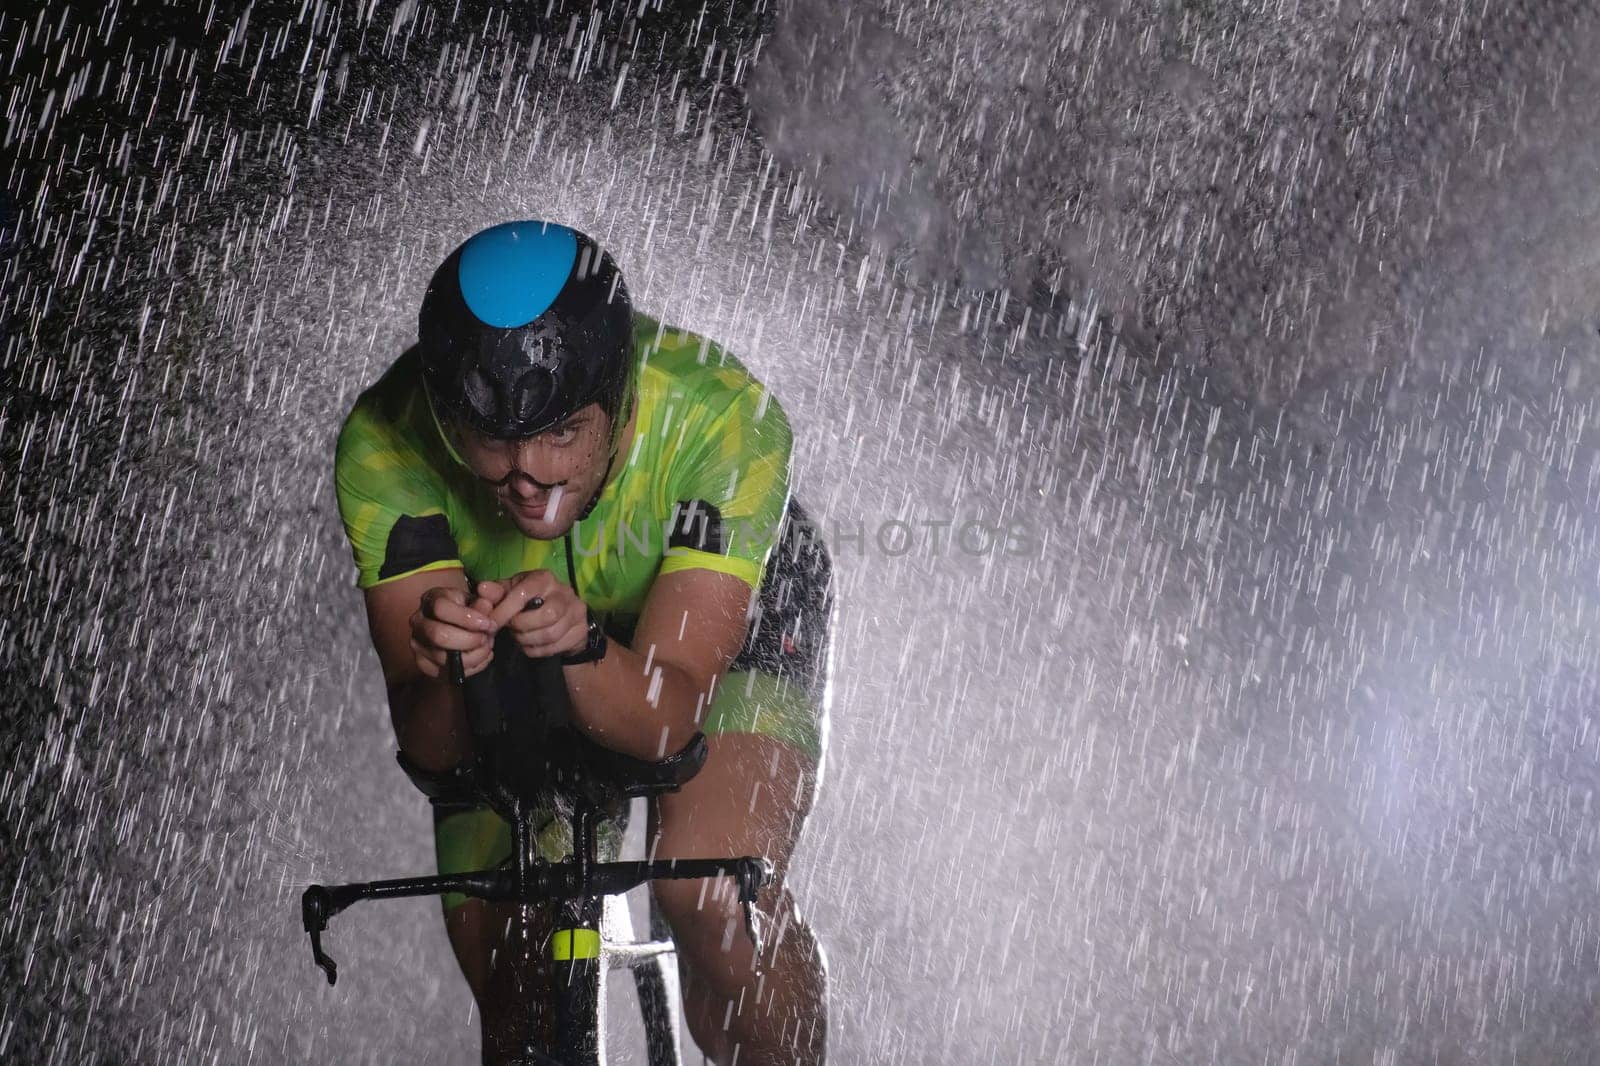 A triathlete braving the rain as he cycles through the night, preparing himself for the upcoming marathon. The blurred raindrops in the foreground and the dark, moody atmosphere in the background add to the sense of determination and grit shown by the athlete